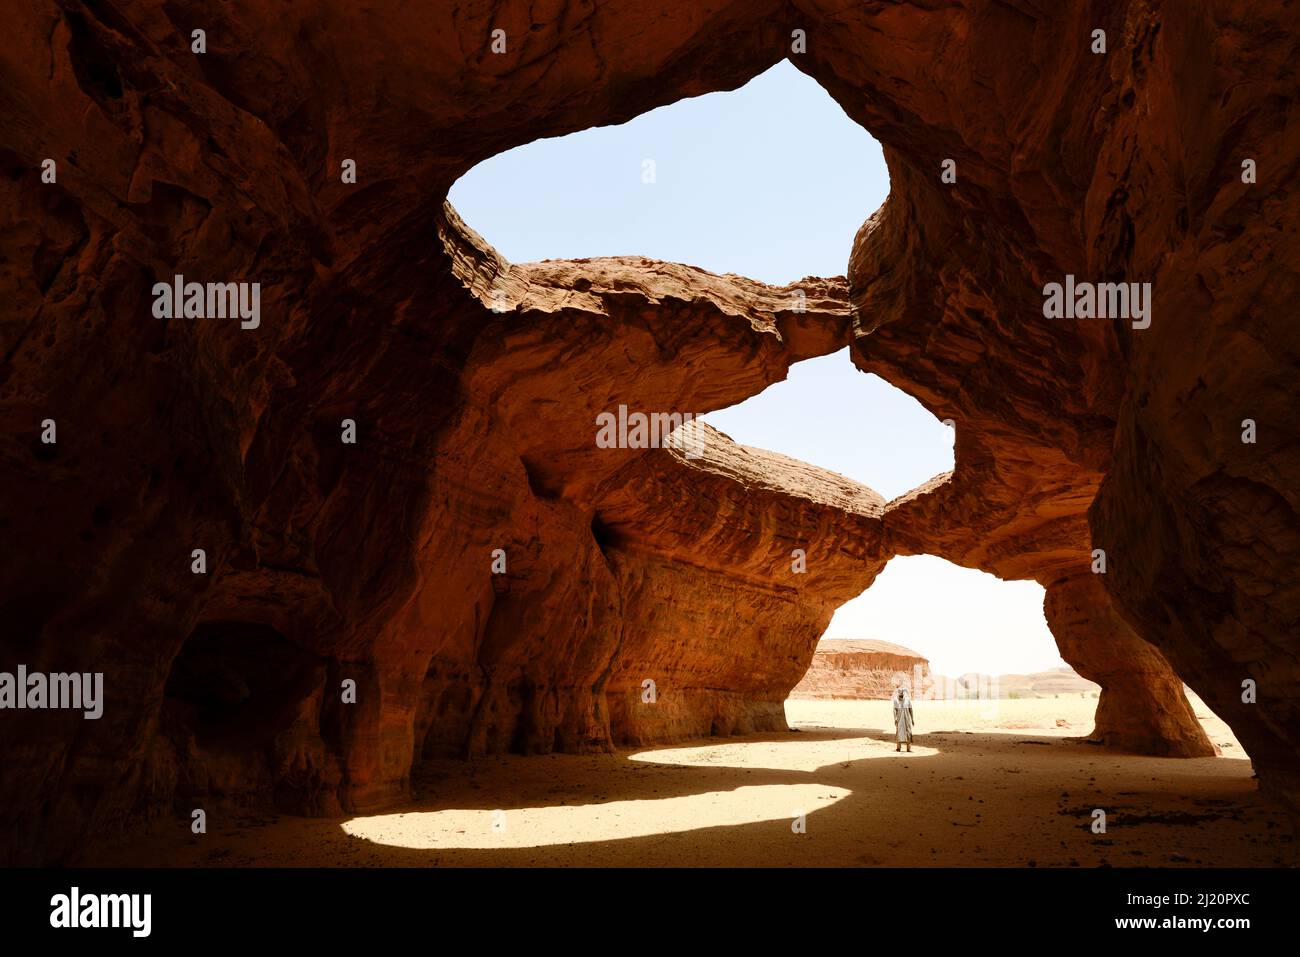 Erosion of sandstone cave roof in the Sahara desert. Ennedi Natural And Cultural Reserve, UNESCO World Heritage Site, Chad. September 2019. Stock Photo